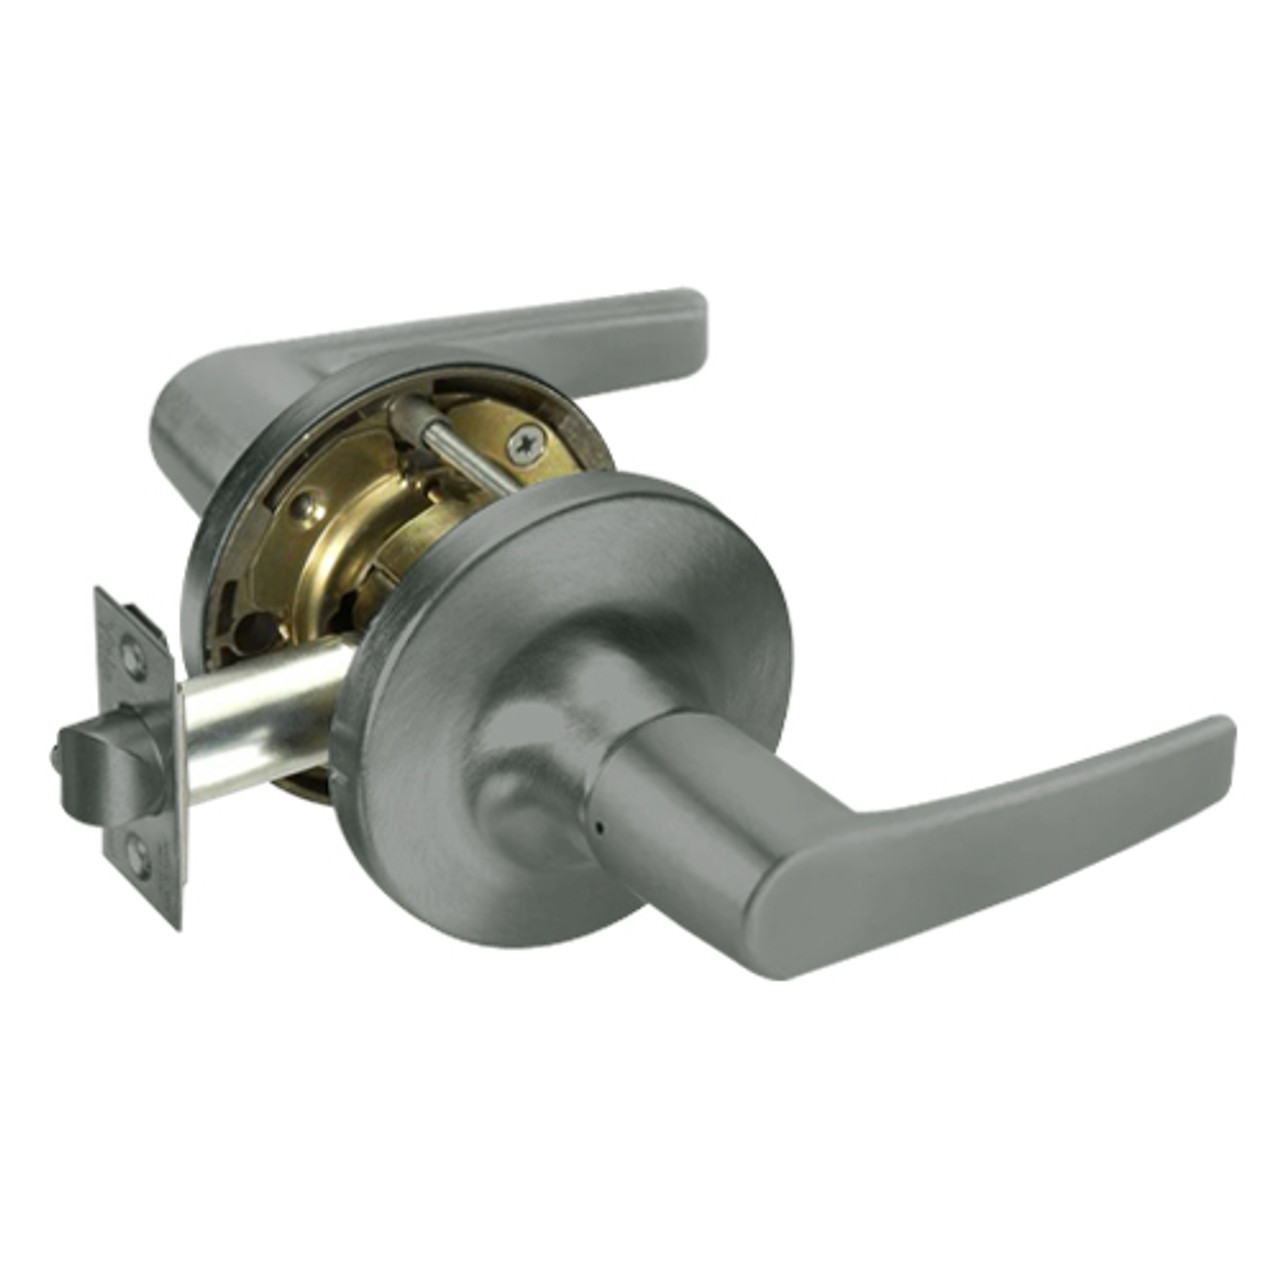 MO5422LN-620 Yale 5400LN Series Single Cylinder Corridor Cylindrical Lock with Monroe Lever in Antique Nickel